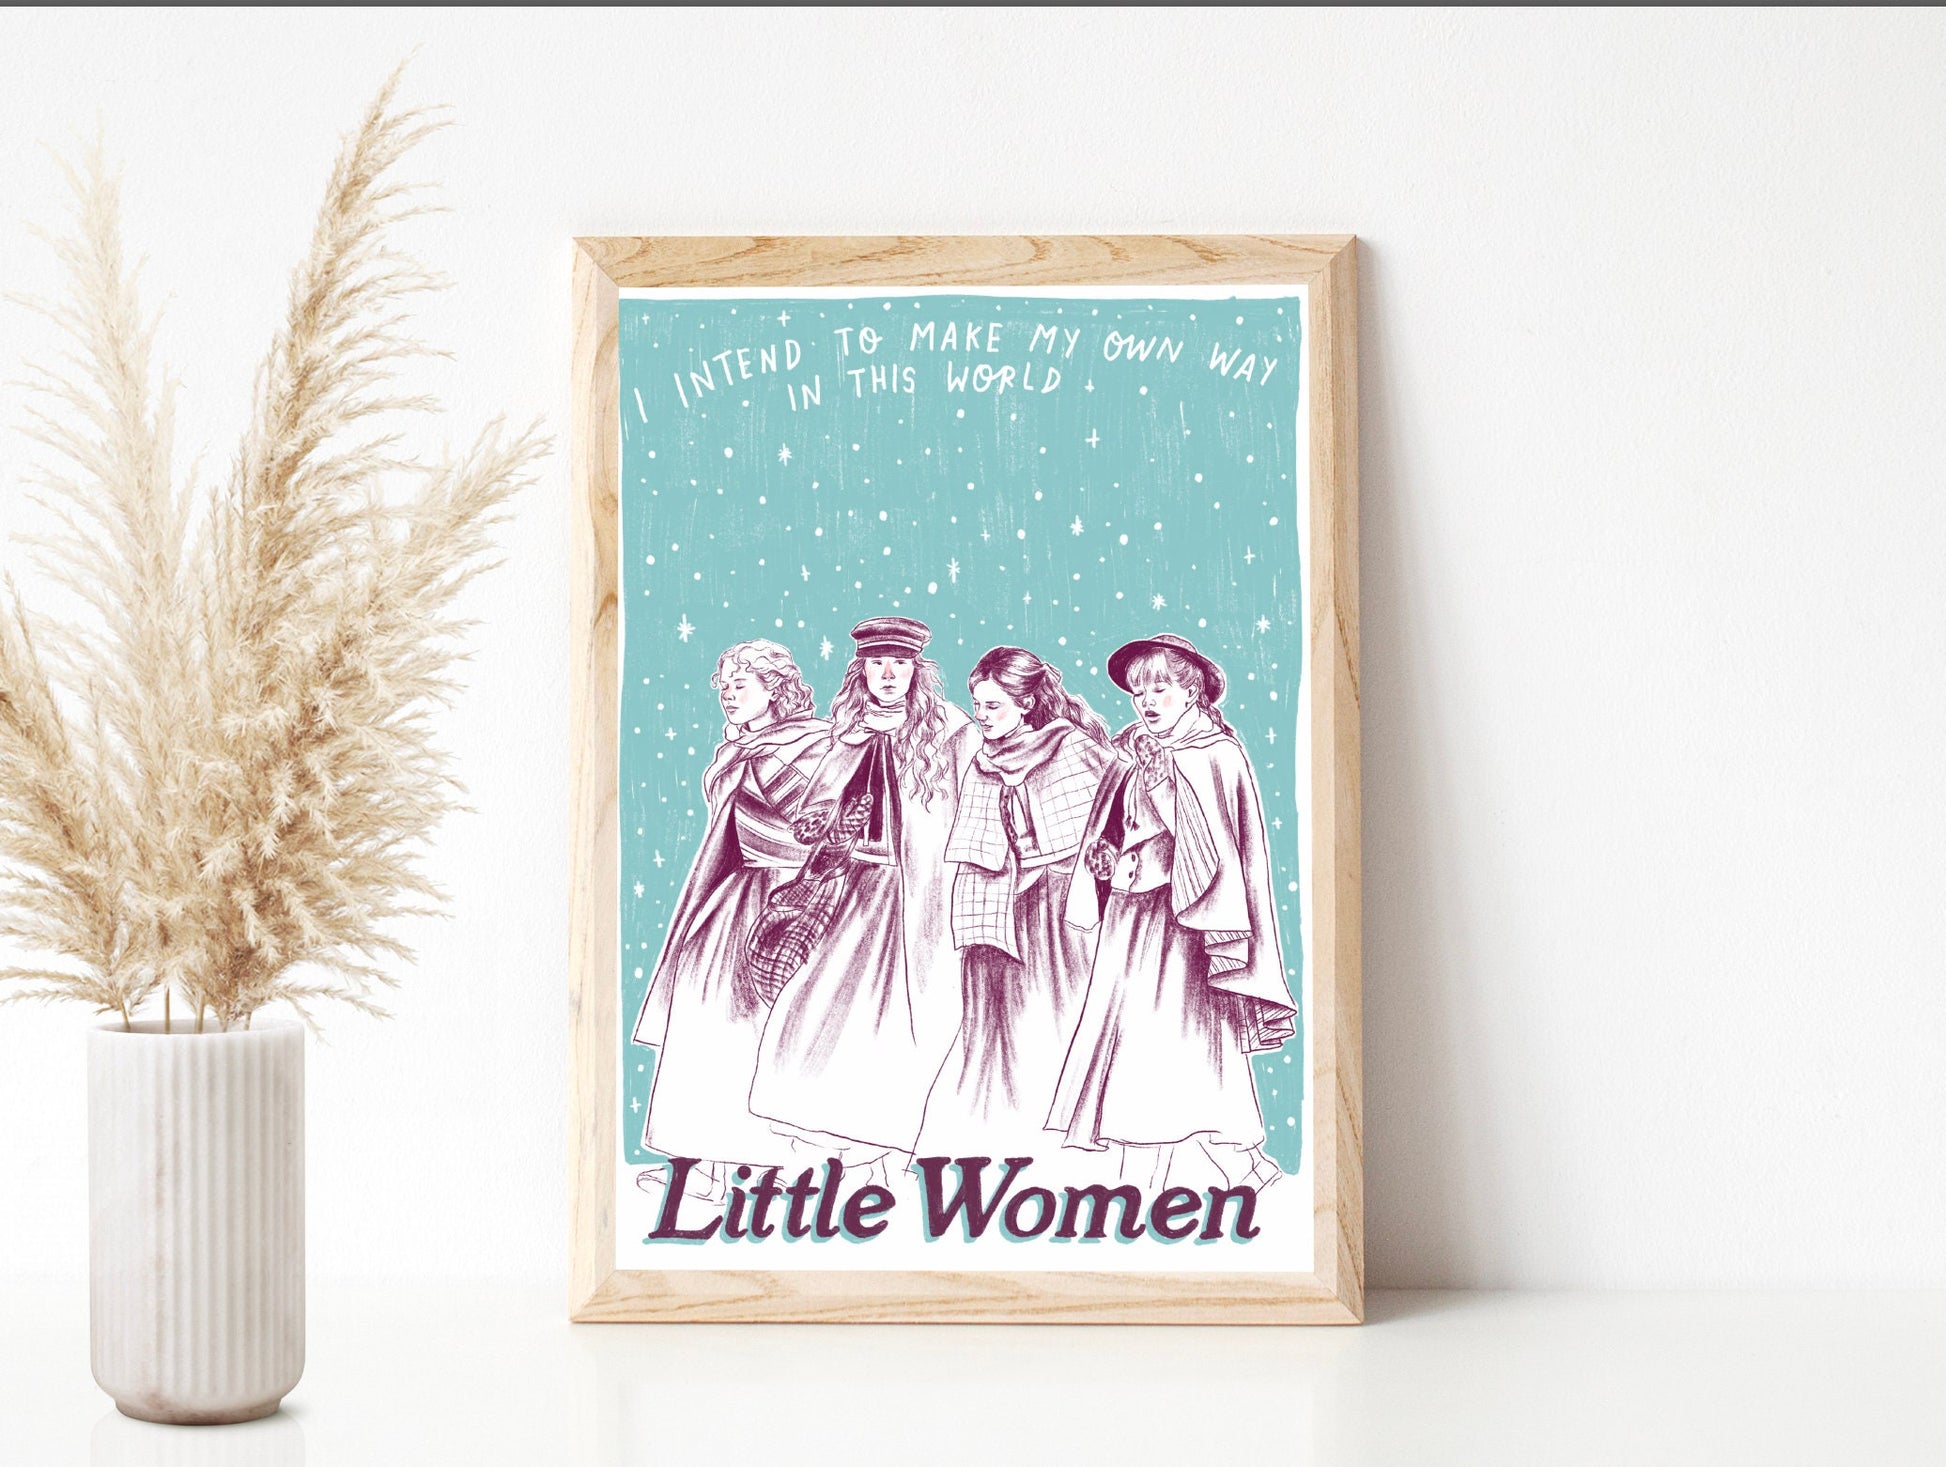 Little Women - I intend to make my own way in this world A4 Art Print